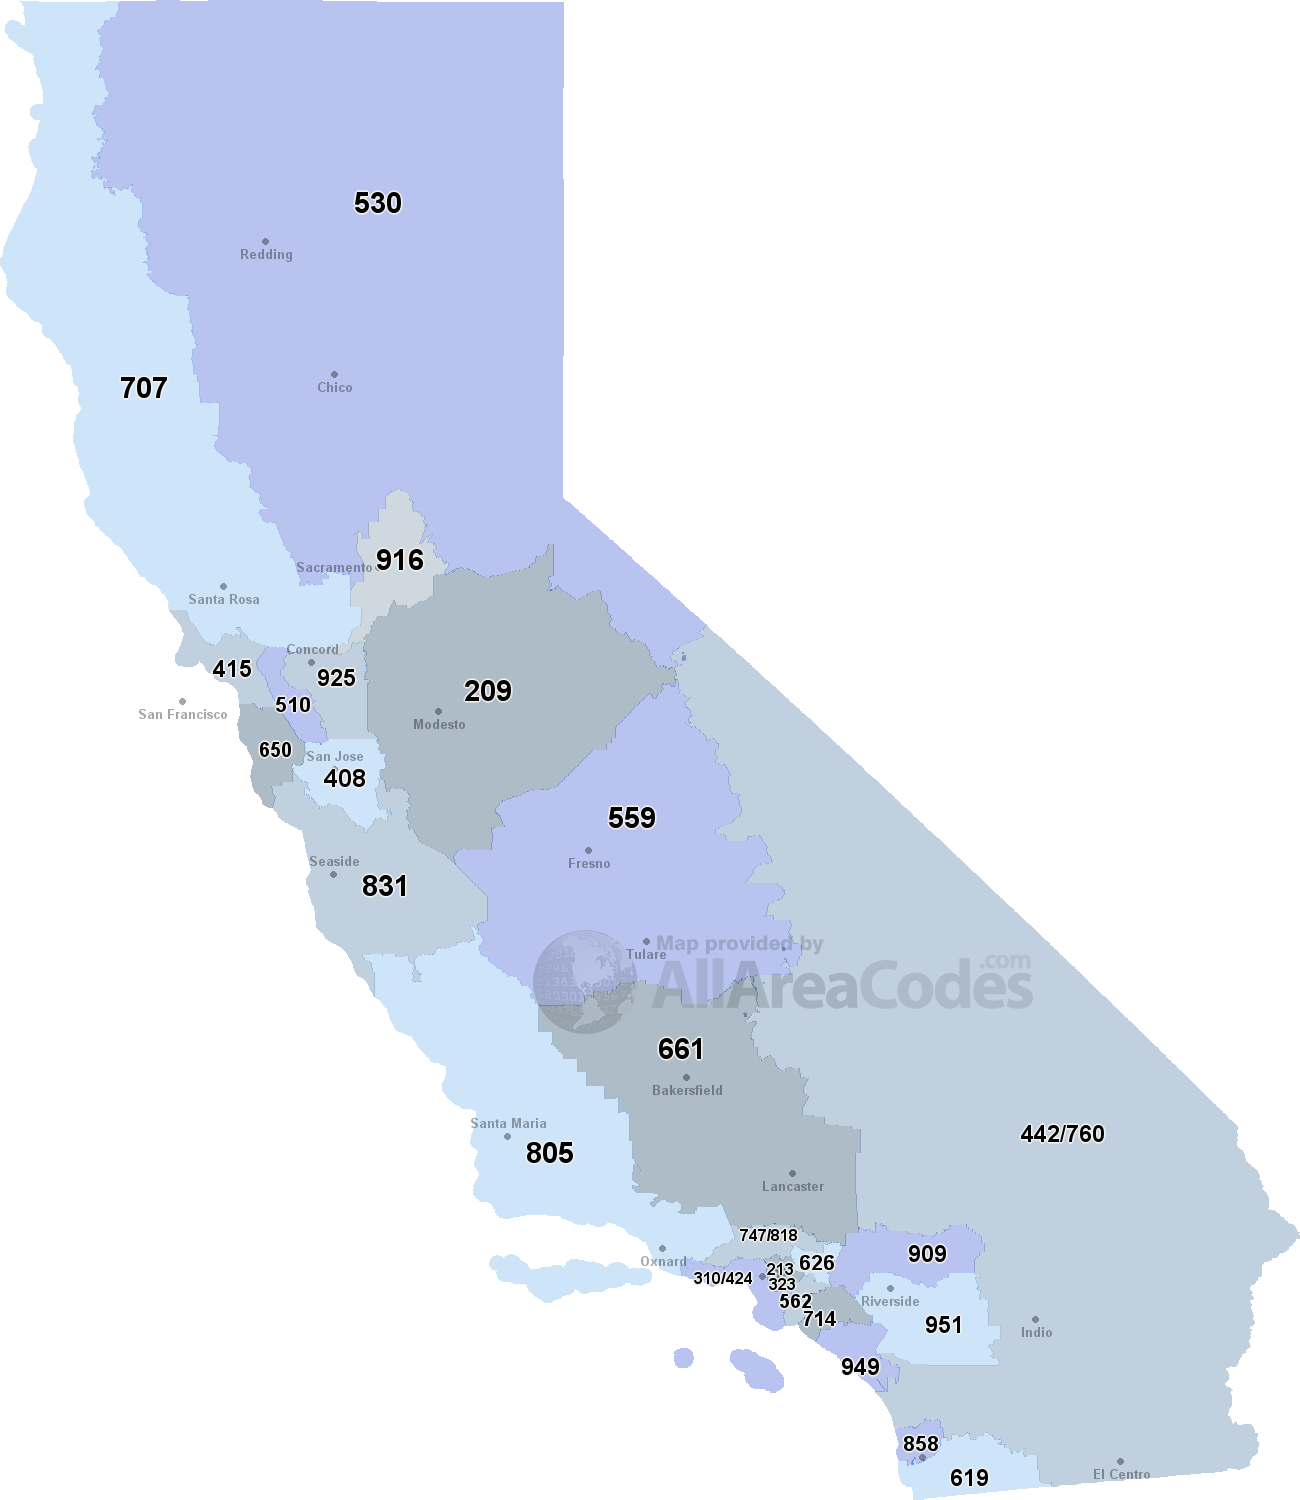 California area codes - Map, list, and phone lookup